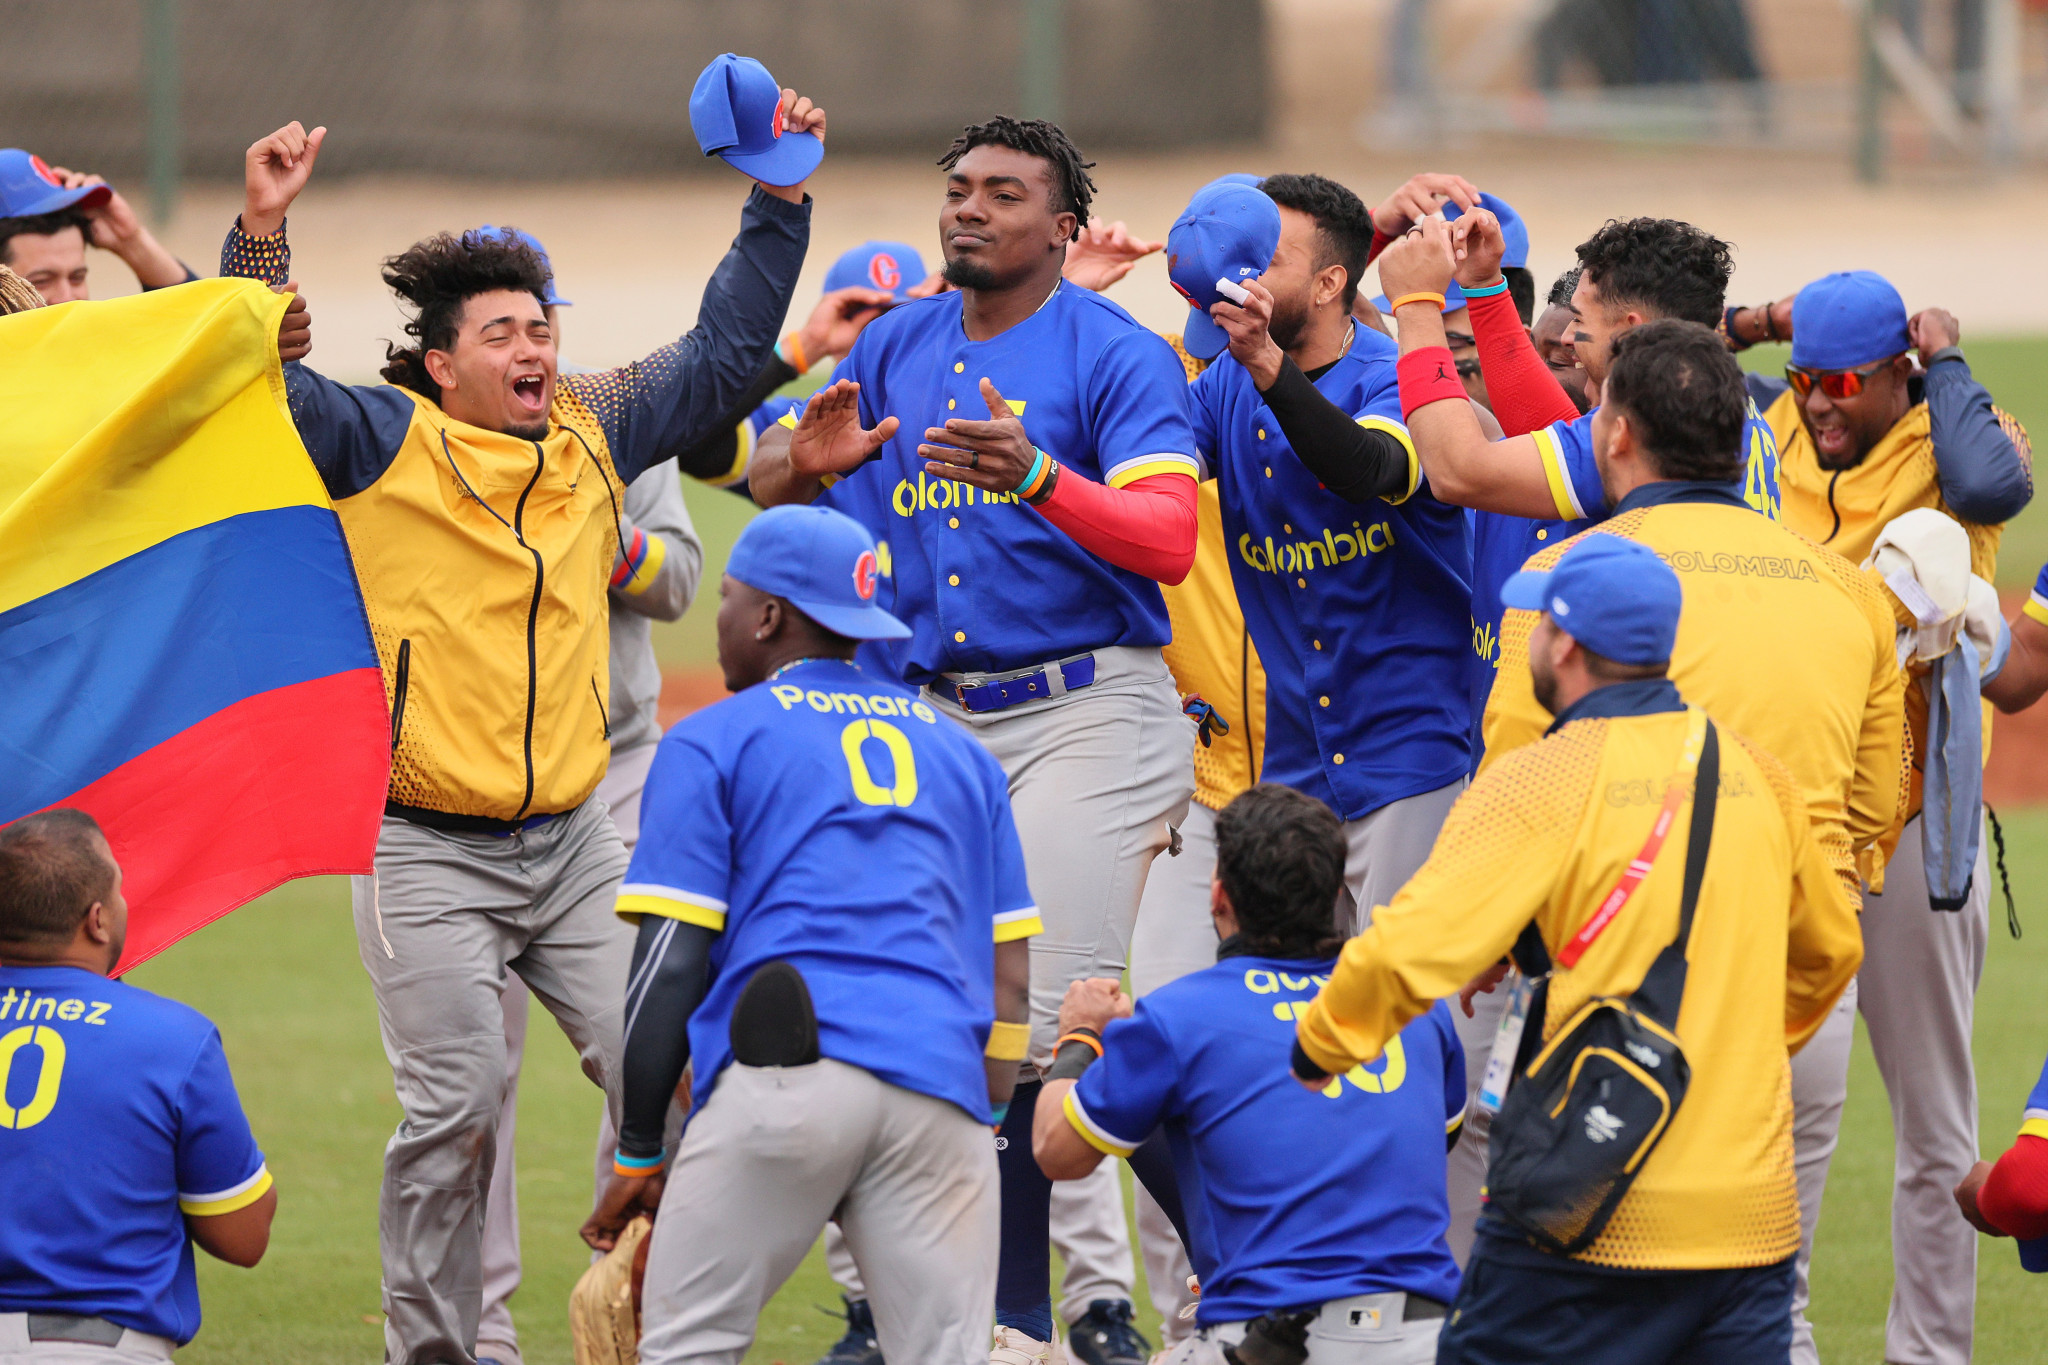 Colombia won men's baseball gold for the first time at the at the Pan American Games in Santiago ©Getty Images